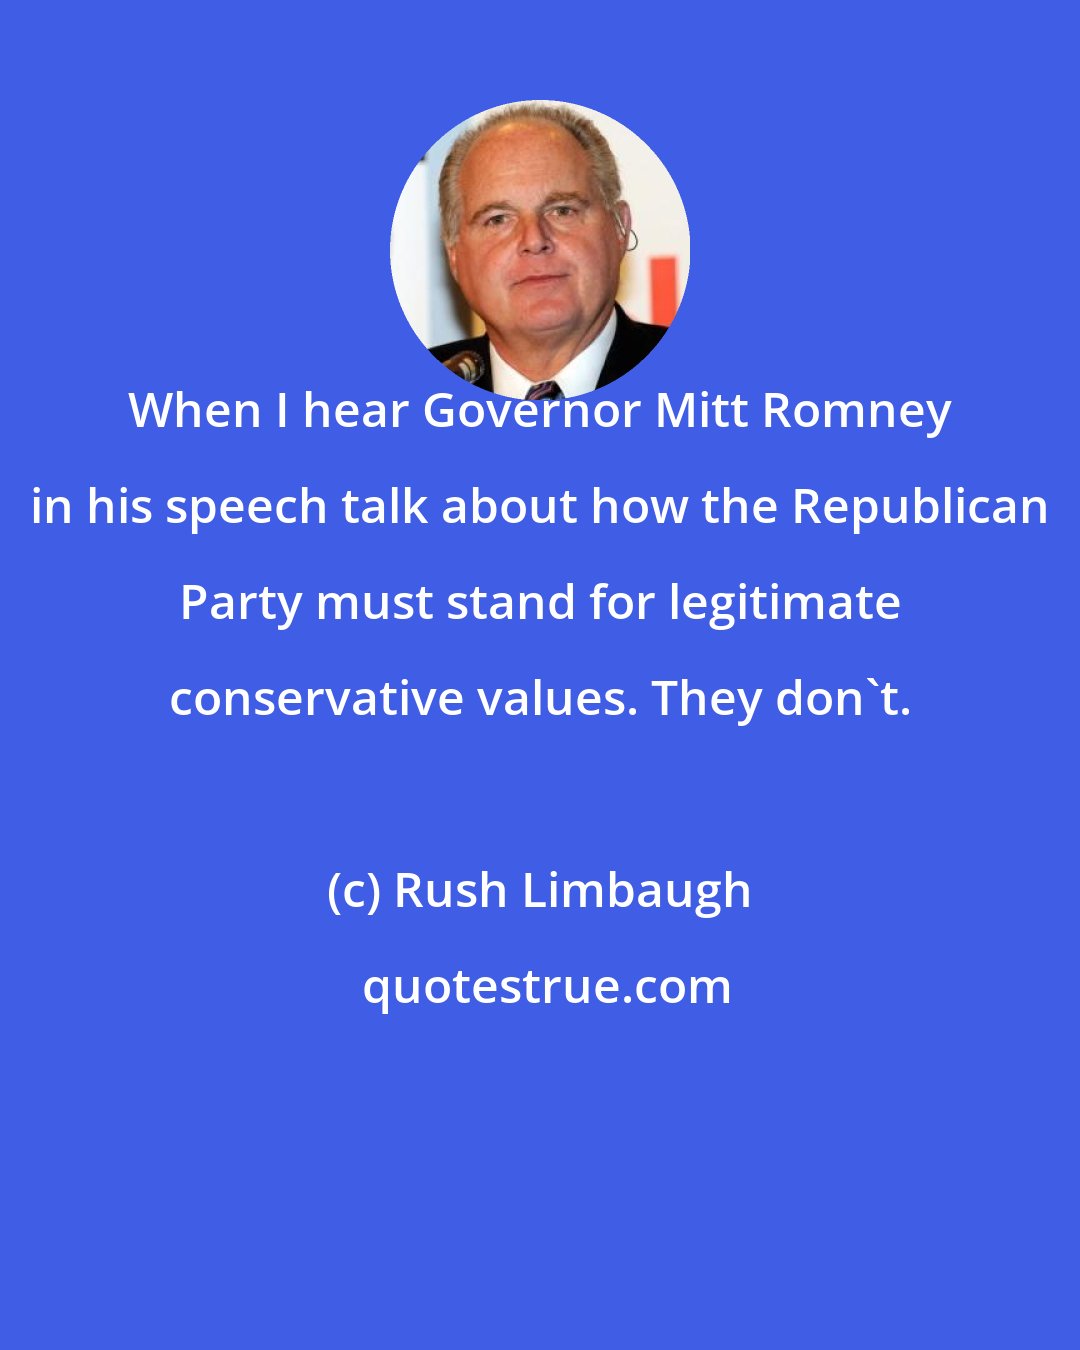 Rush Limbaugh: When I hear Governor Mitt Romney in his speech talk about how the Republican Party must stand for legitimate conservative values. They don't.